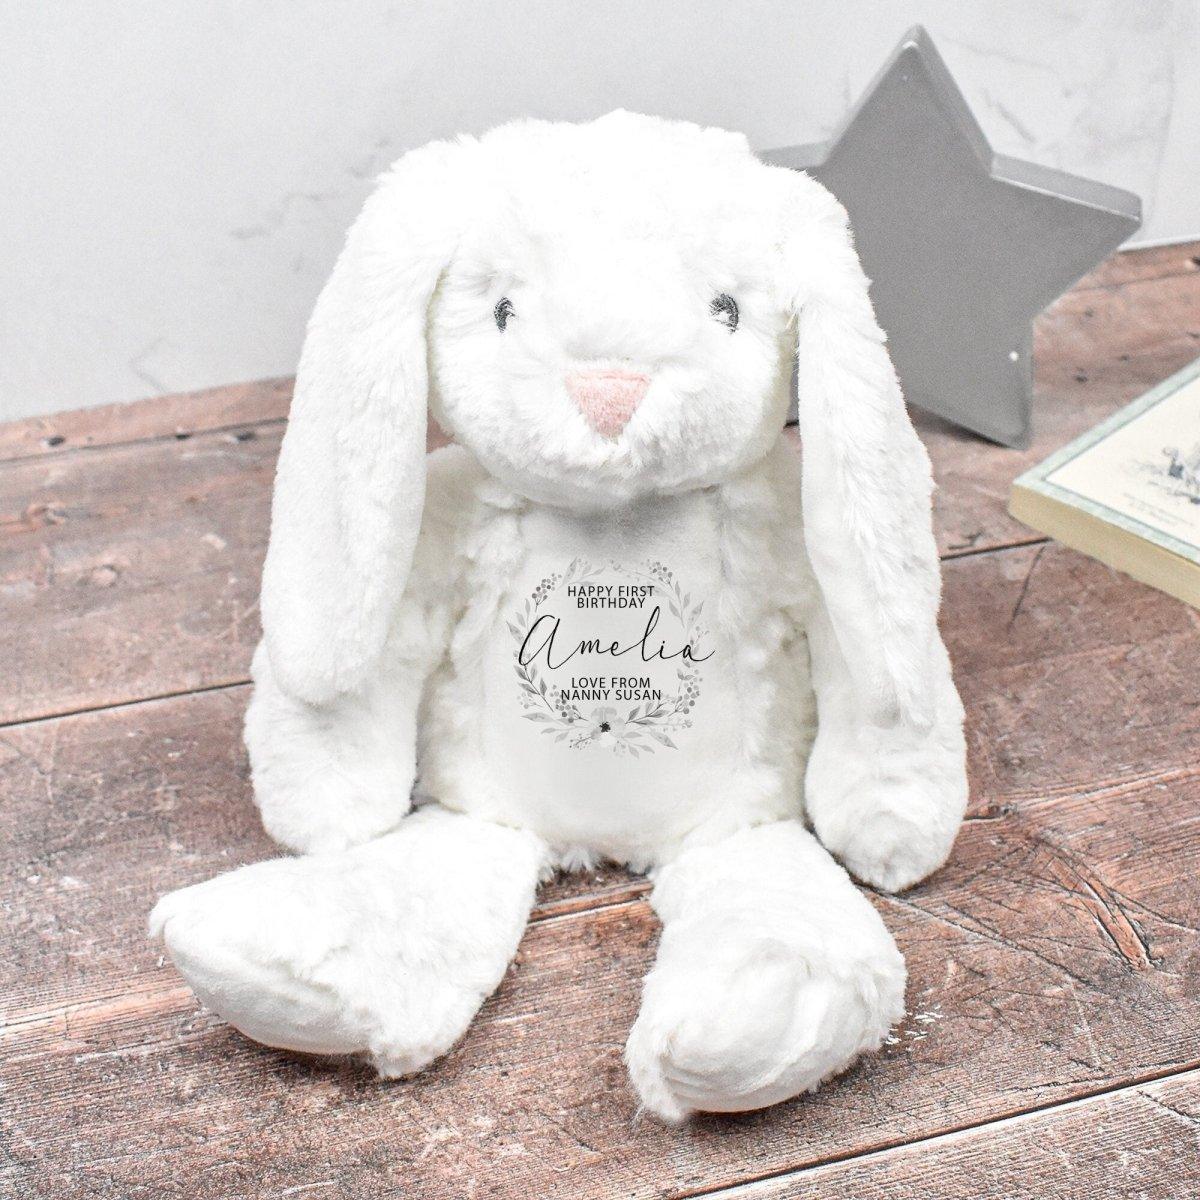 Personalised First Birthday Teddy, Baby First Birthday Toy, First Birthday Gift, Baby Teddy, First Birthday Bunny, Meaningful Gift, Baby Boy - Amy Lucy